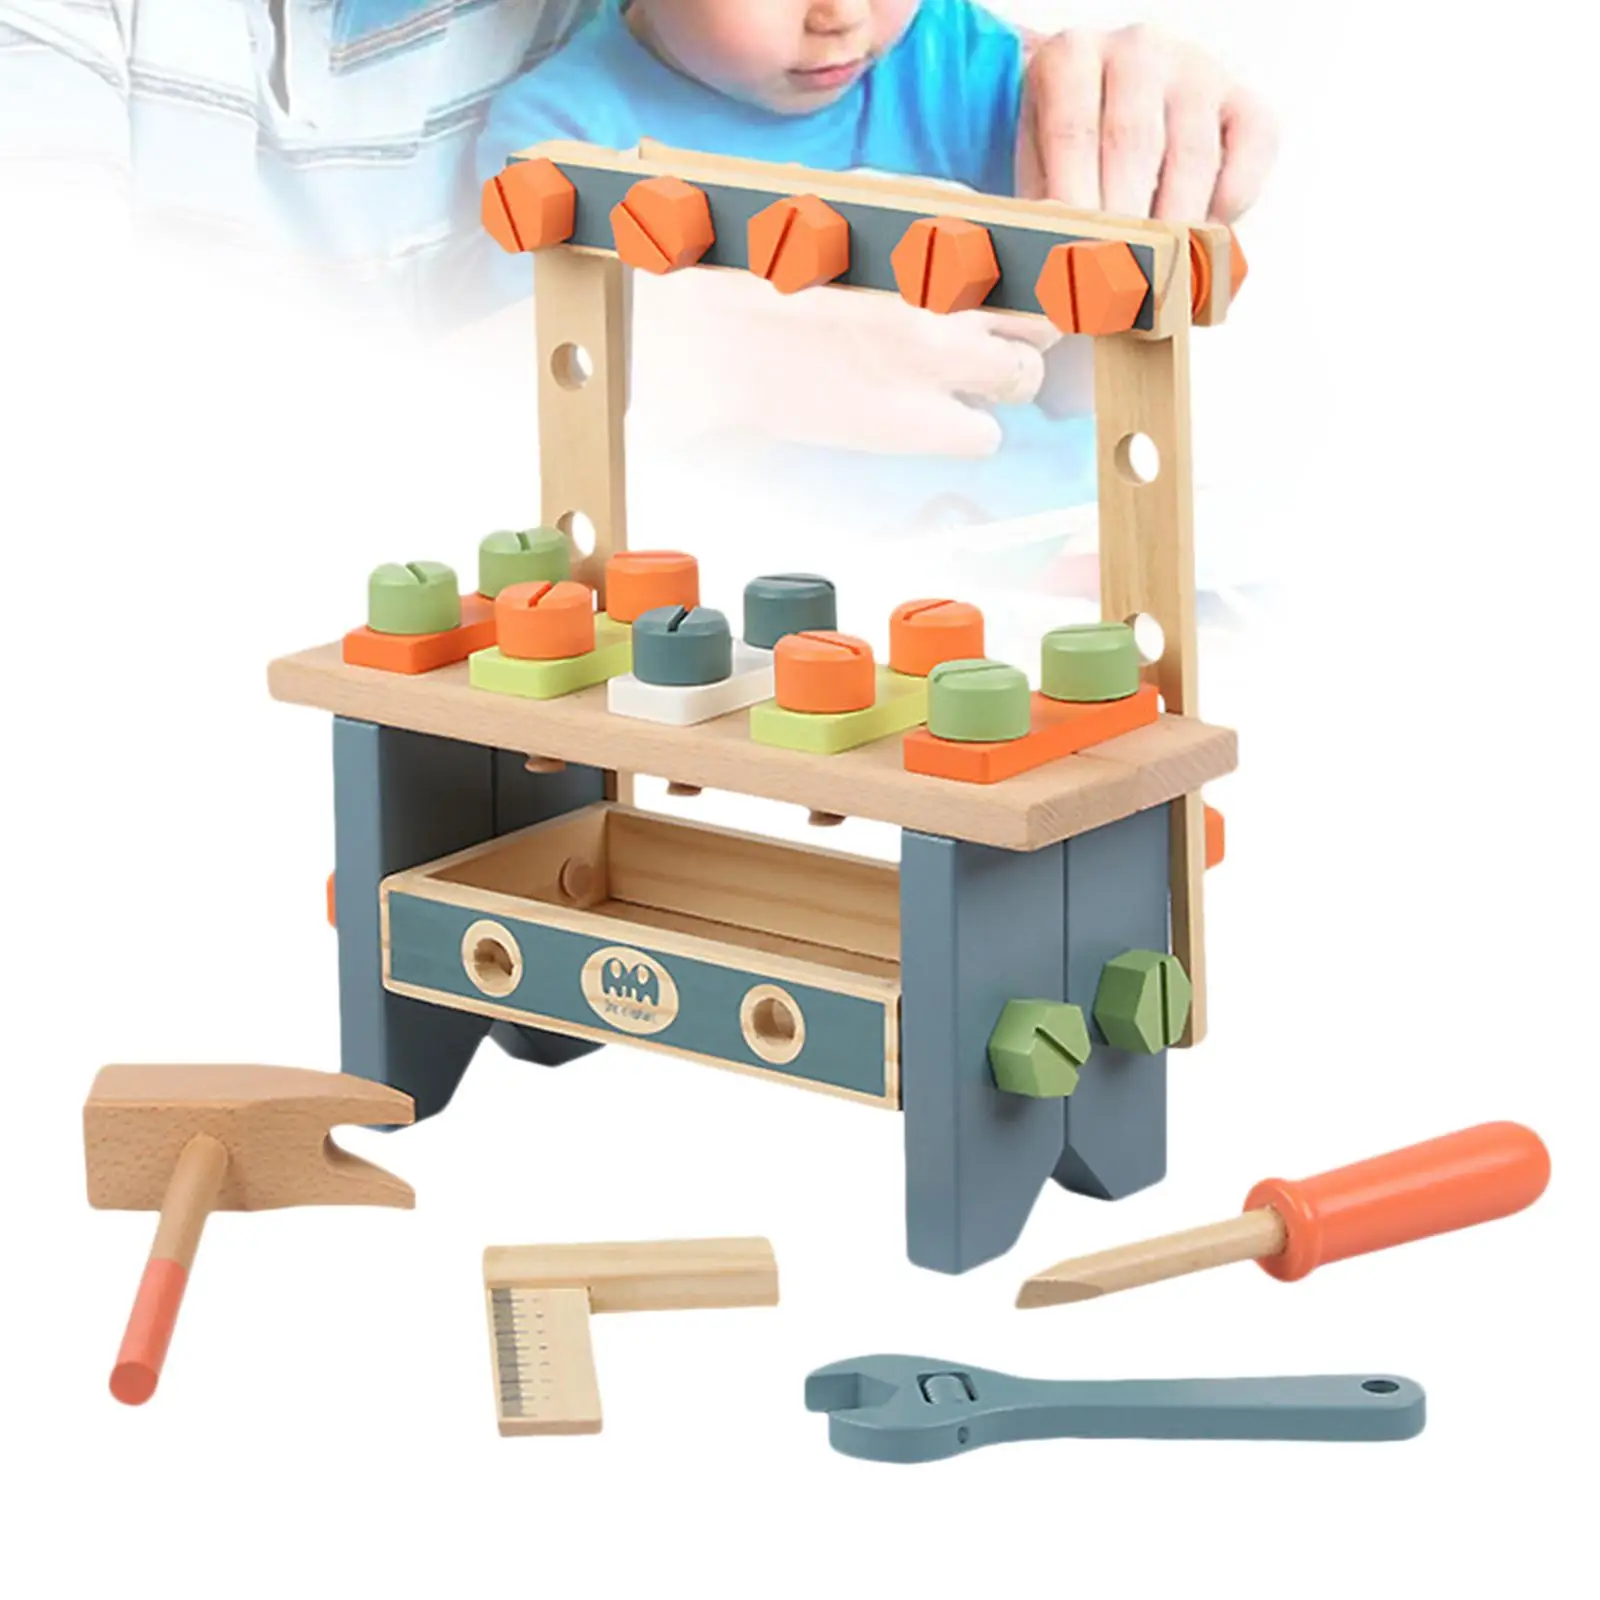 Mini Wooden Workbench for Children`s Play Tools for Toddlers,